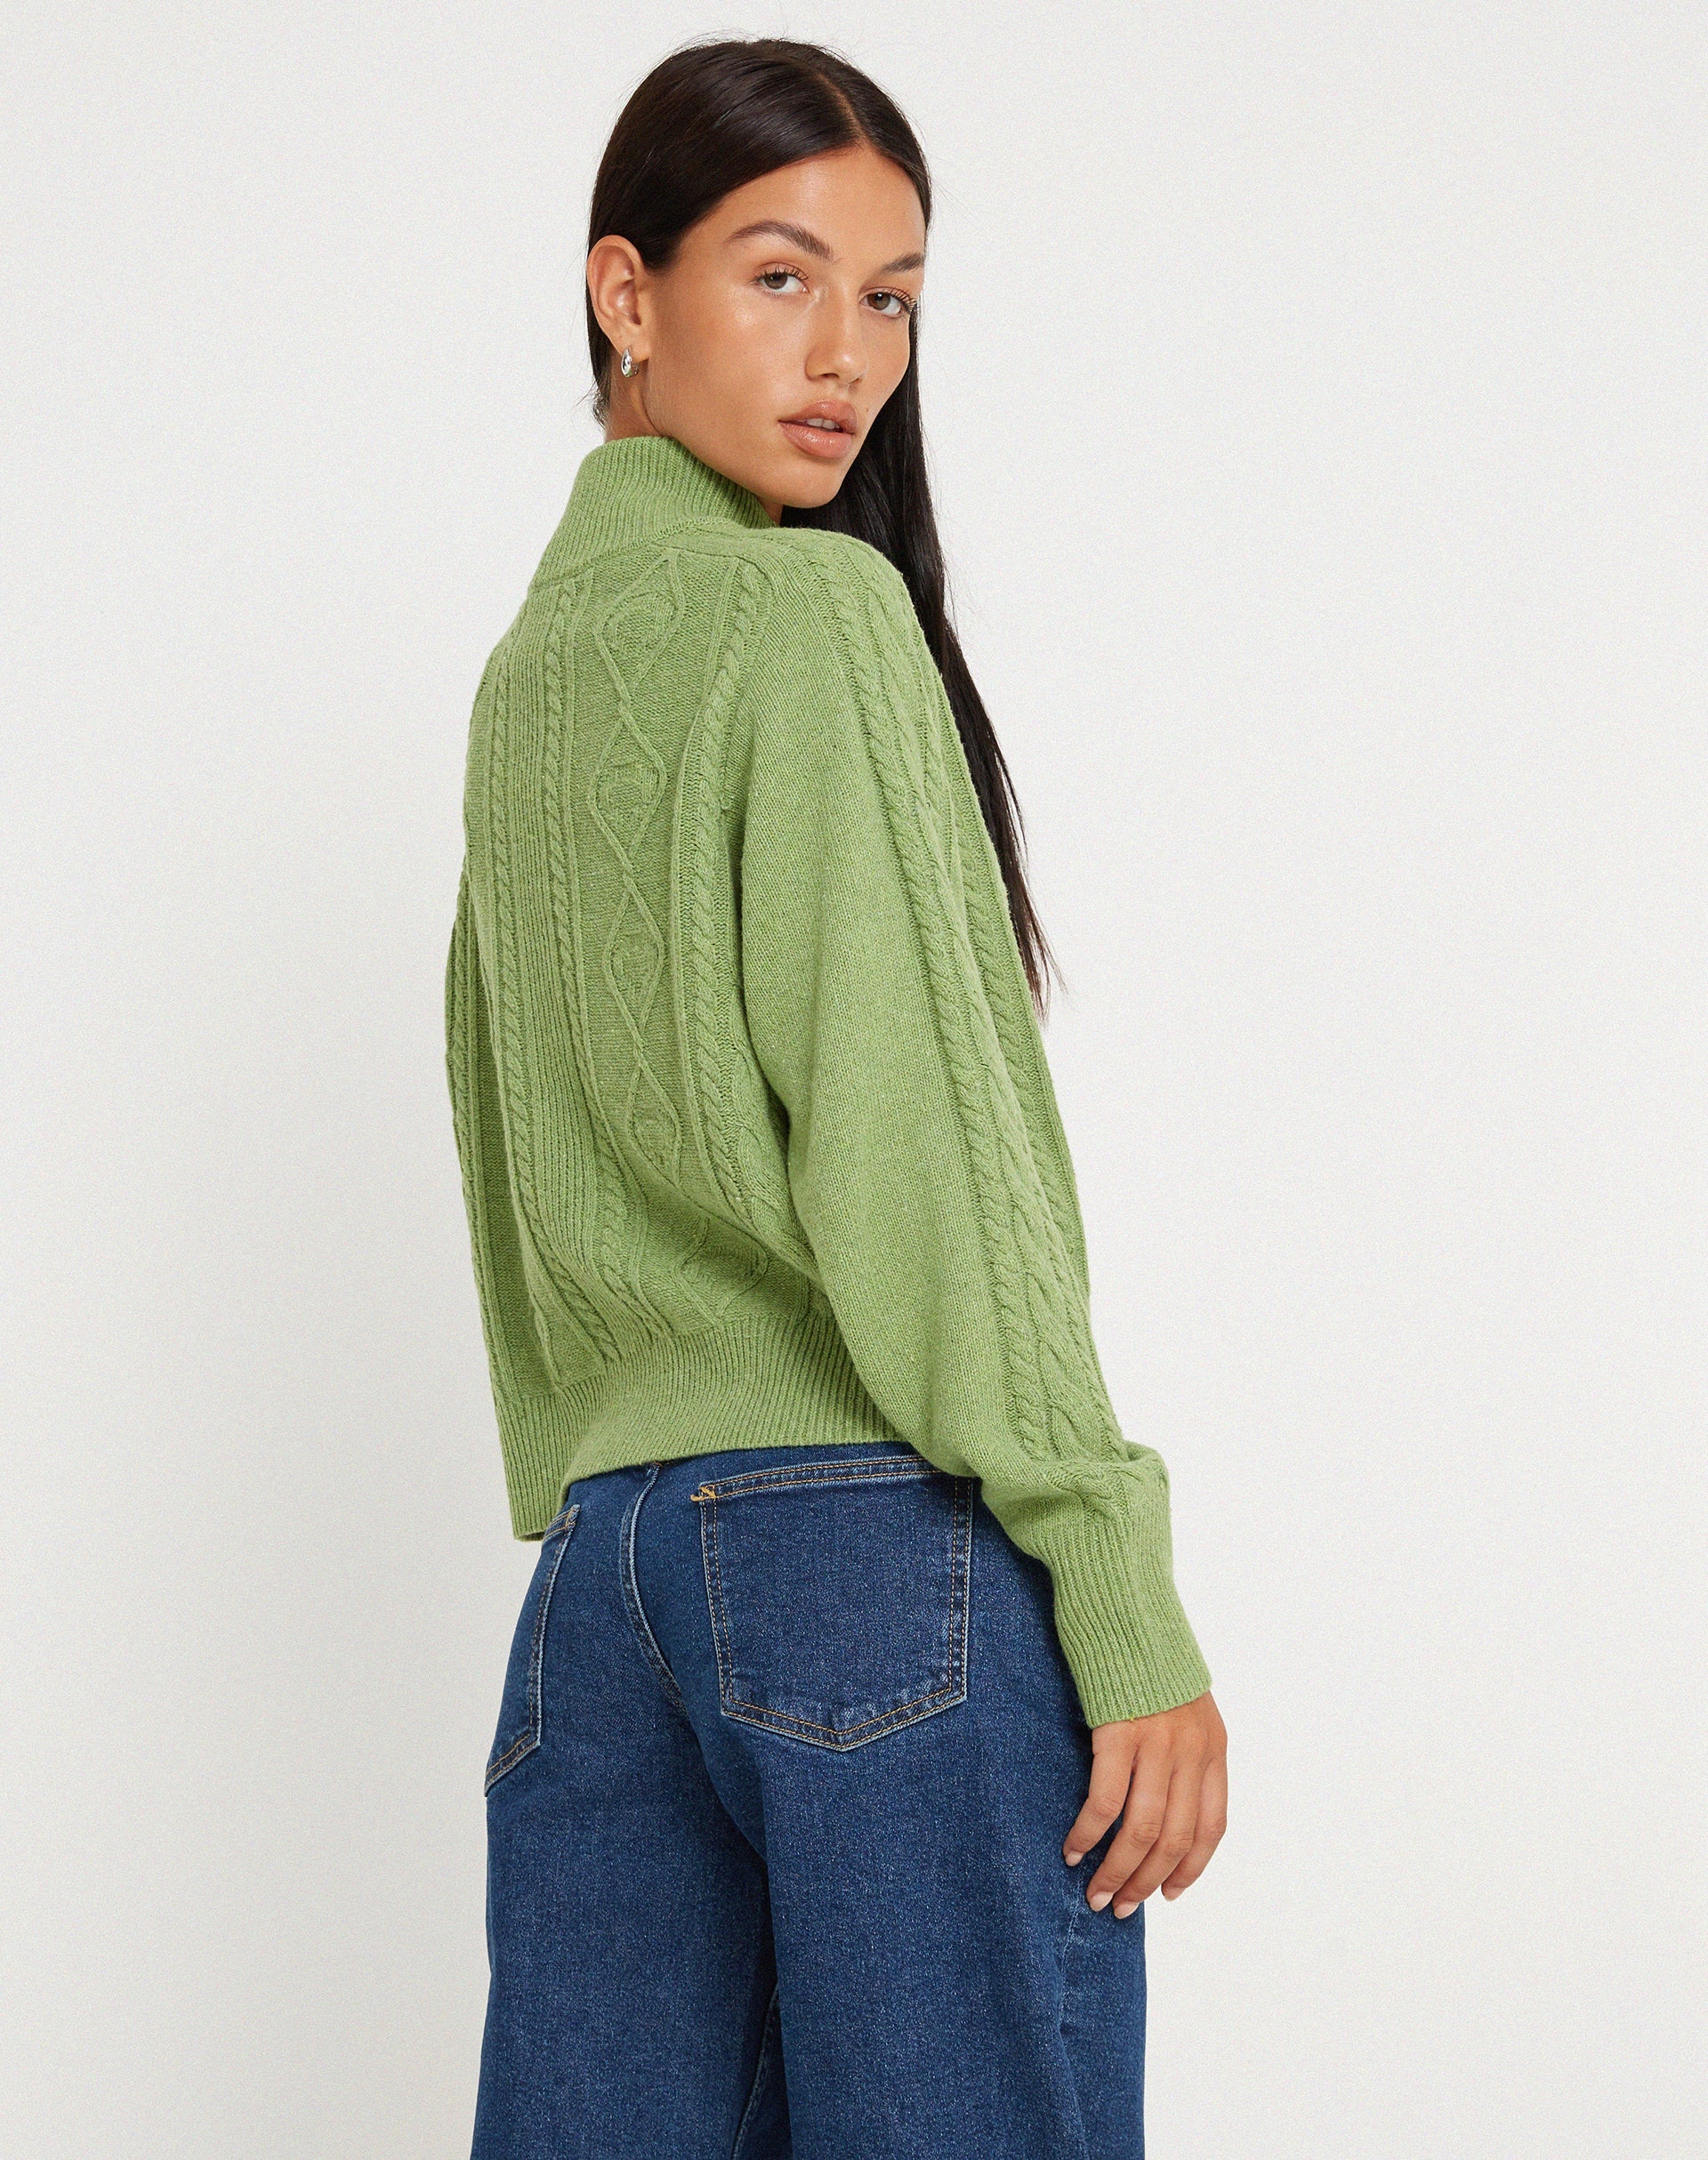 image of Lemila Knitted Zip Up Jacket in Moss Green